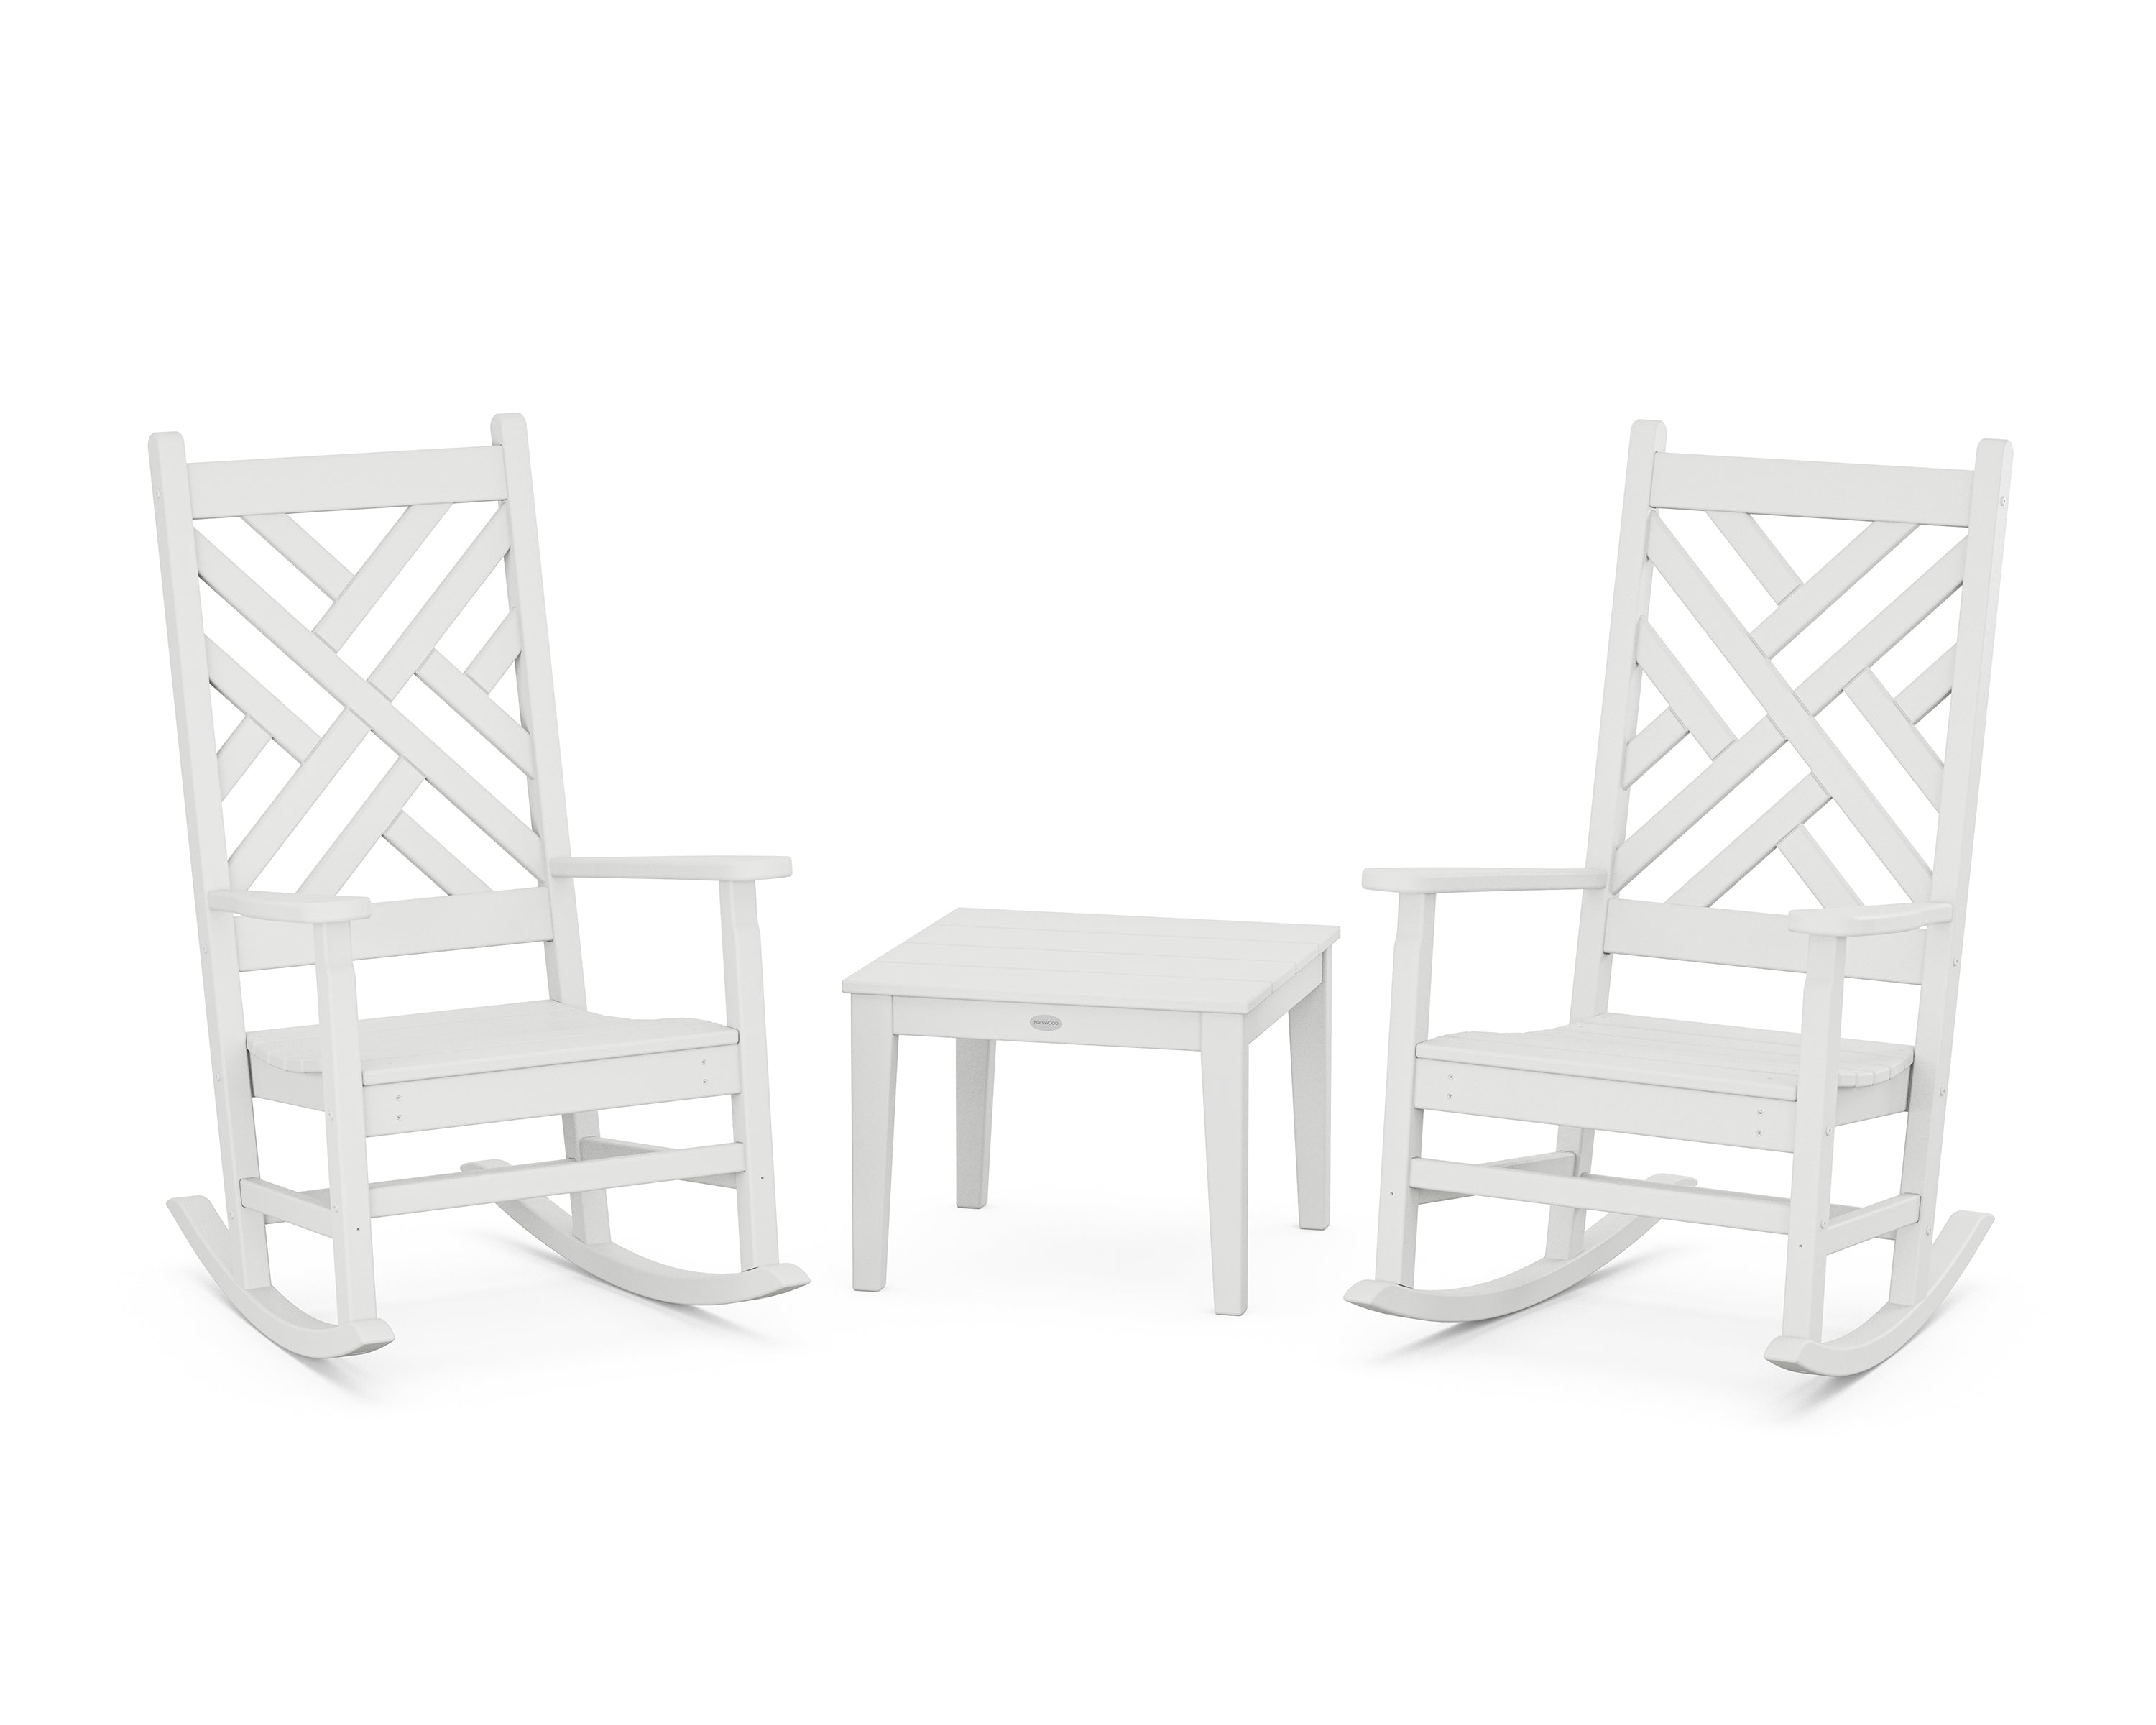 POLYWOOD® Chippendale 3-Piece Rocking Chair Set in White